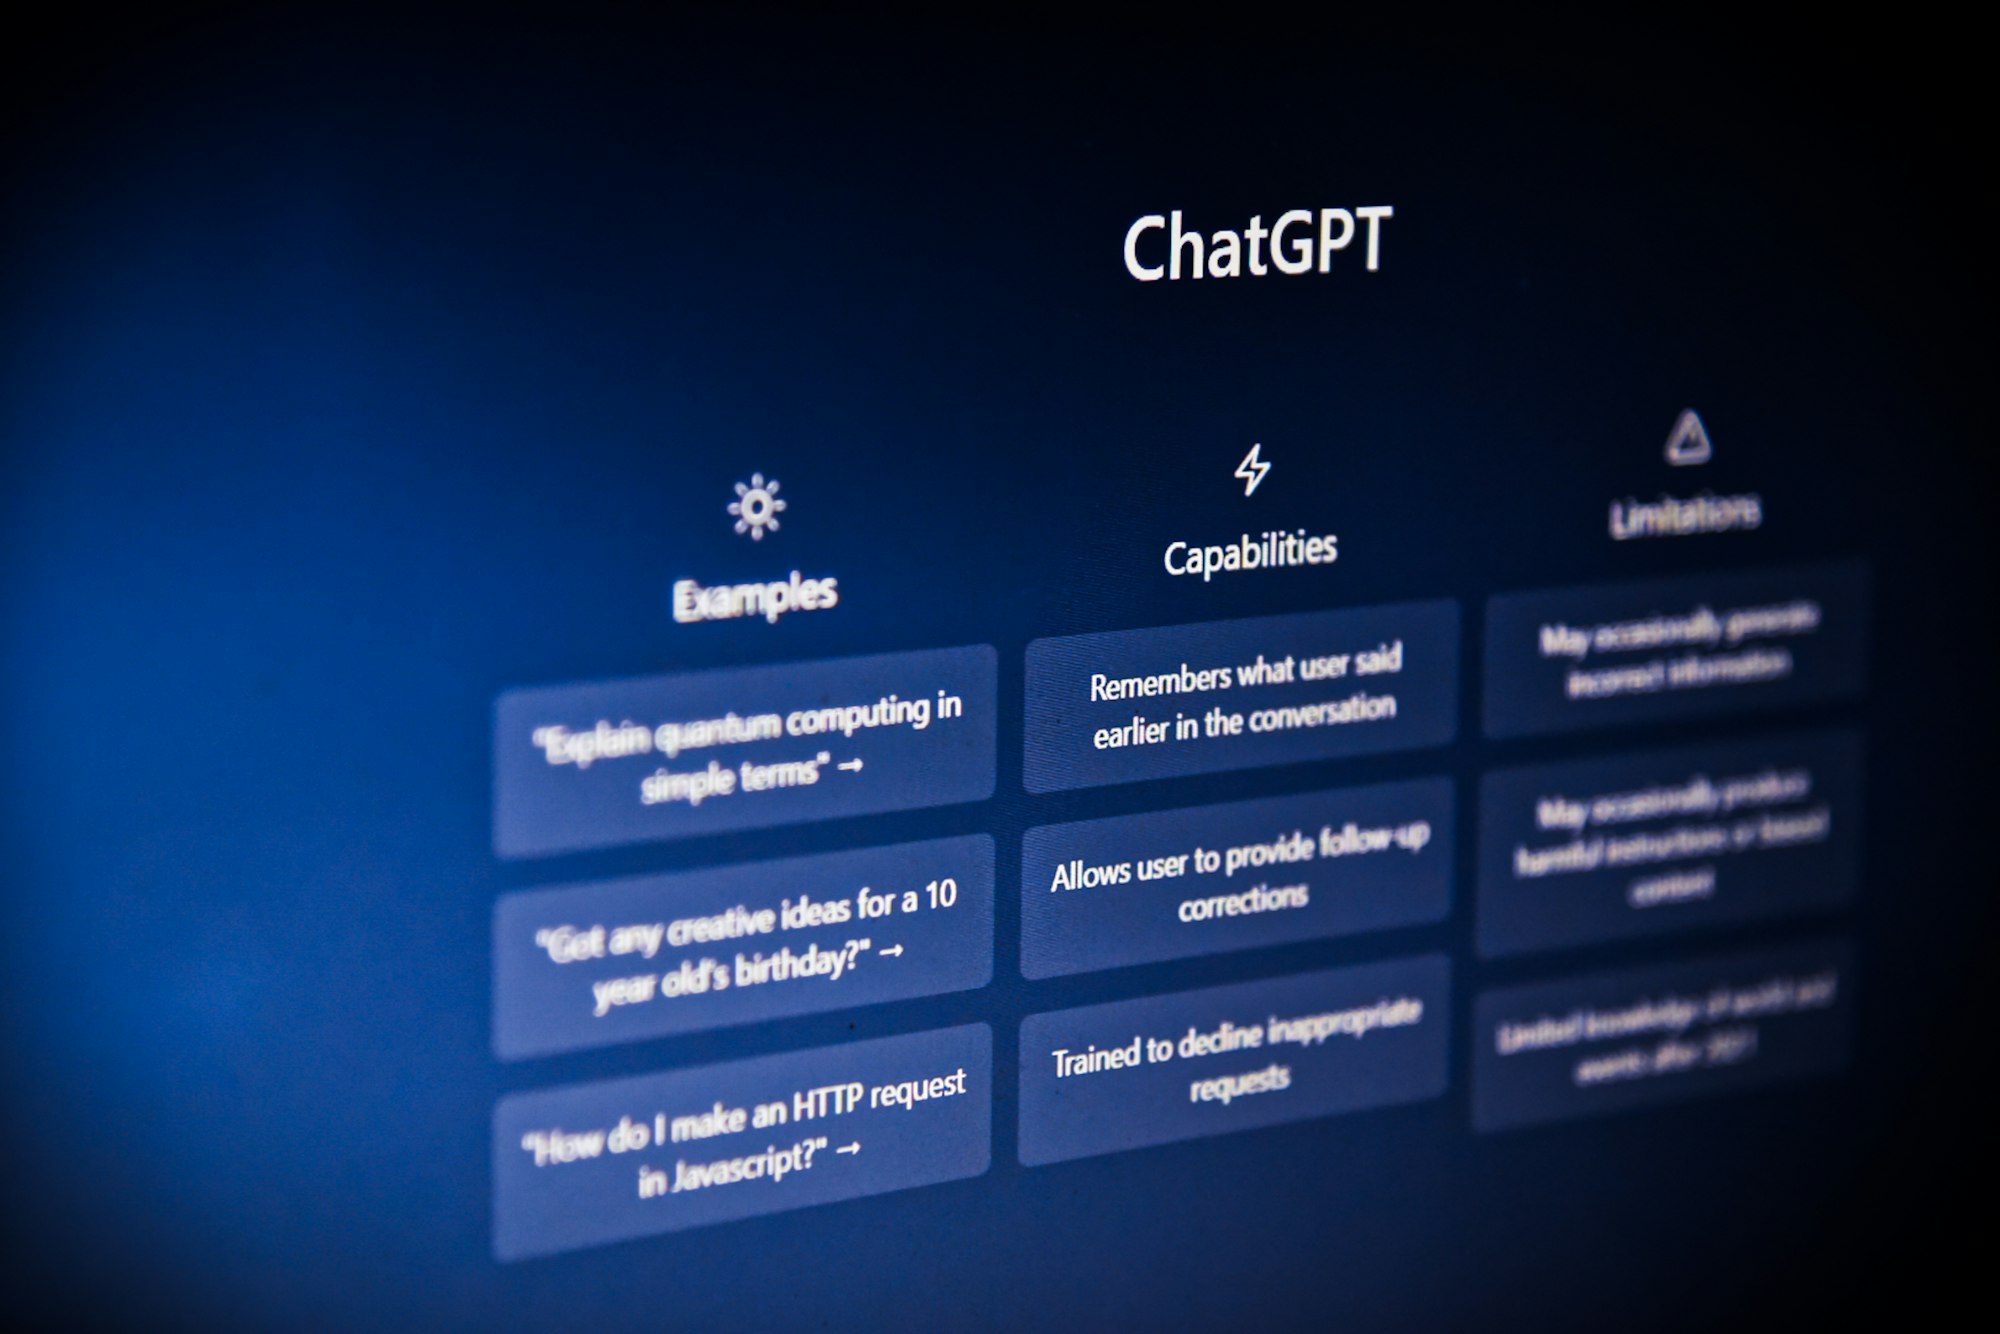 OpenAI's ChatGPT chatbot gains web browsing capabilities with new plug-in support